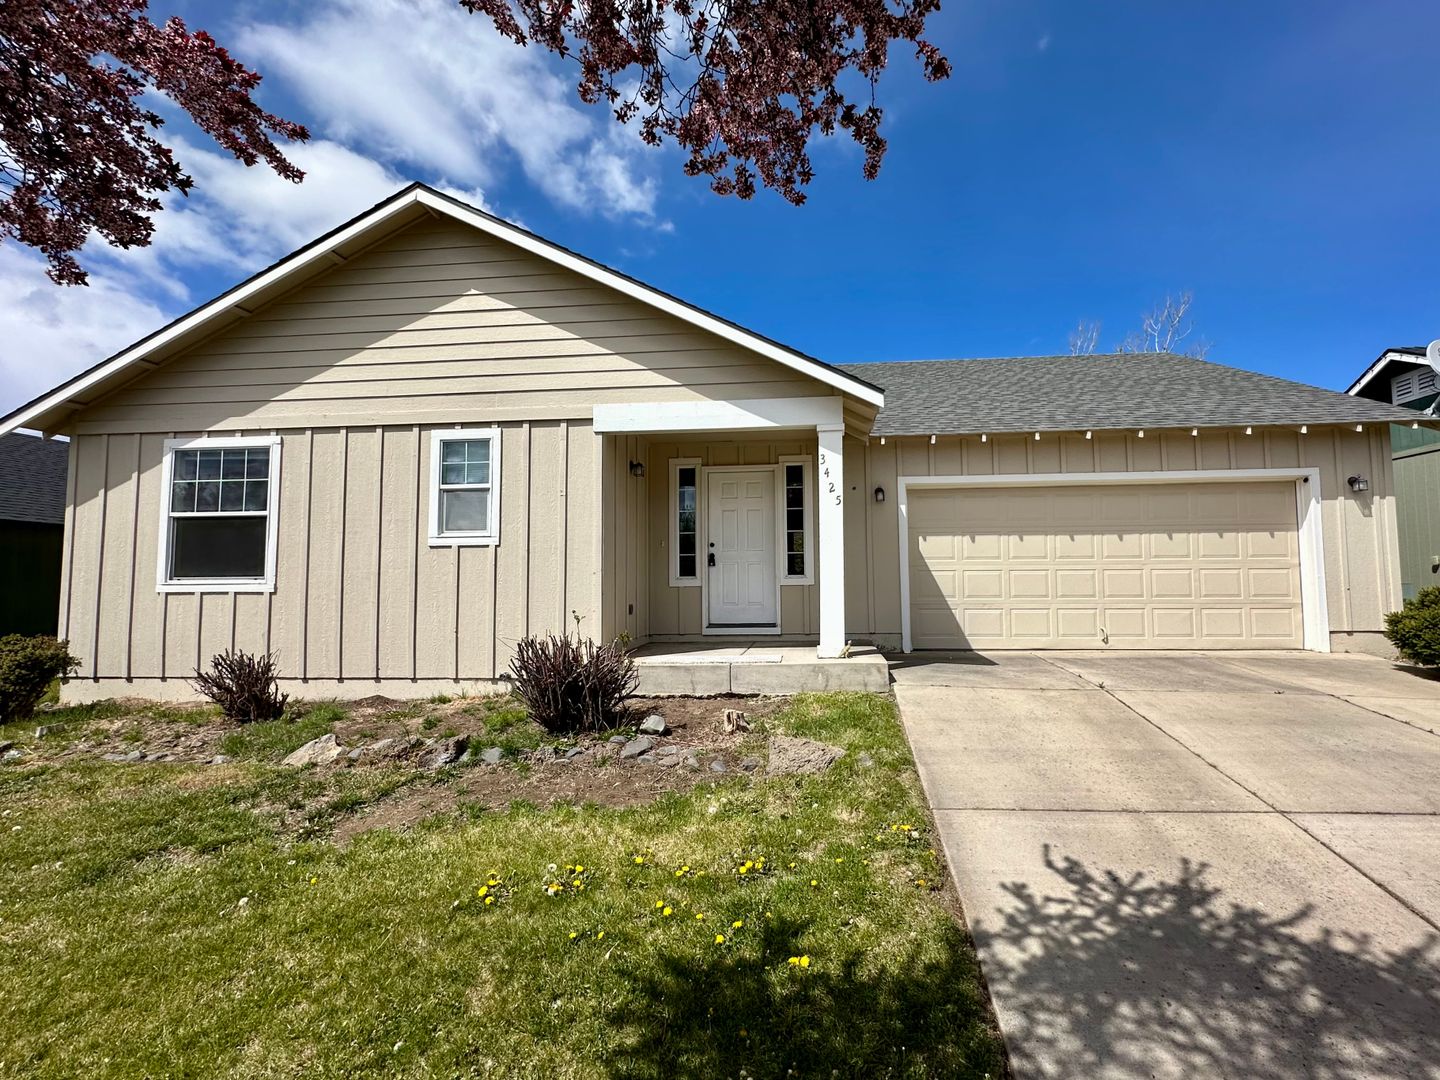 Fully Remodeled 3/2 in Redmond!